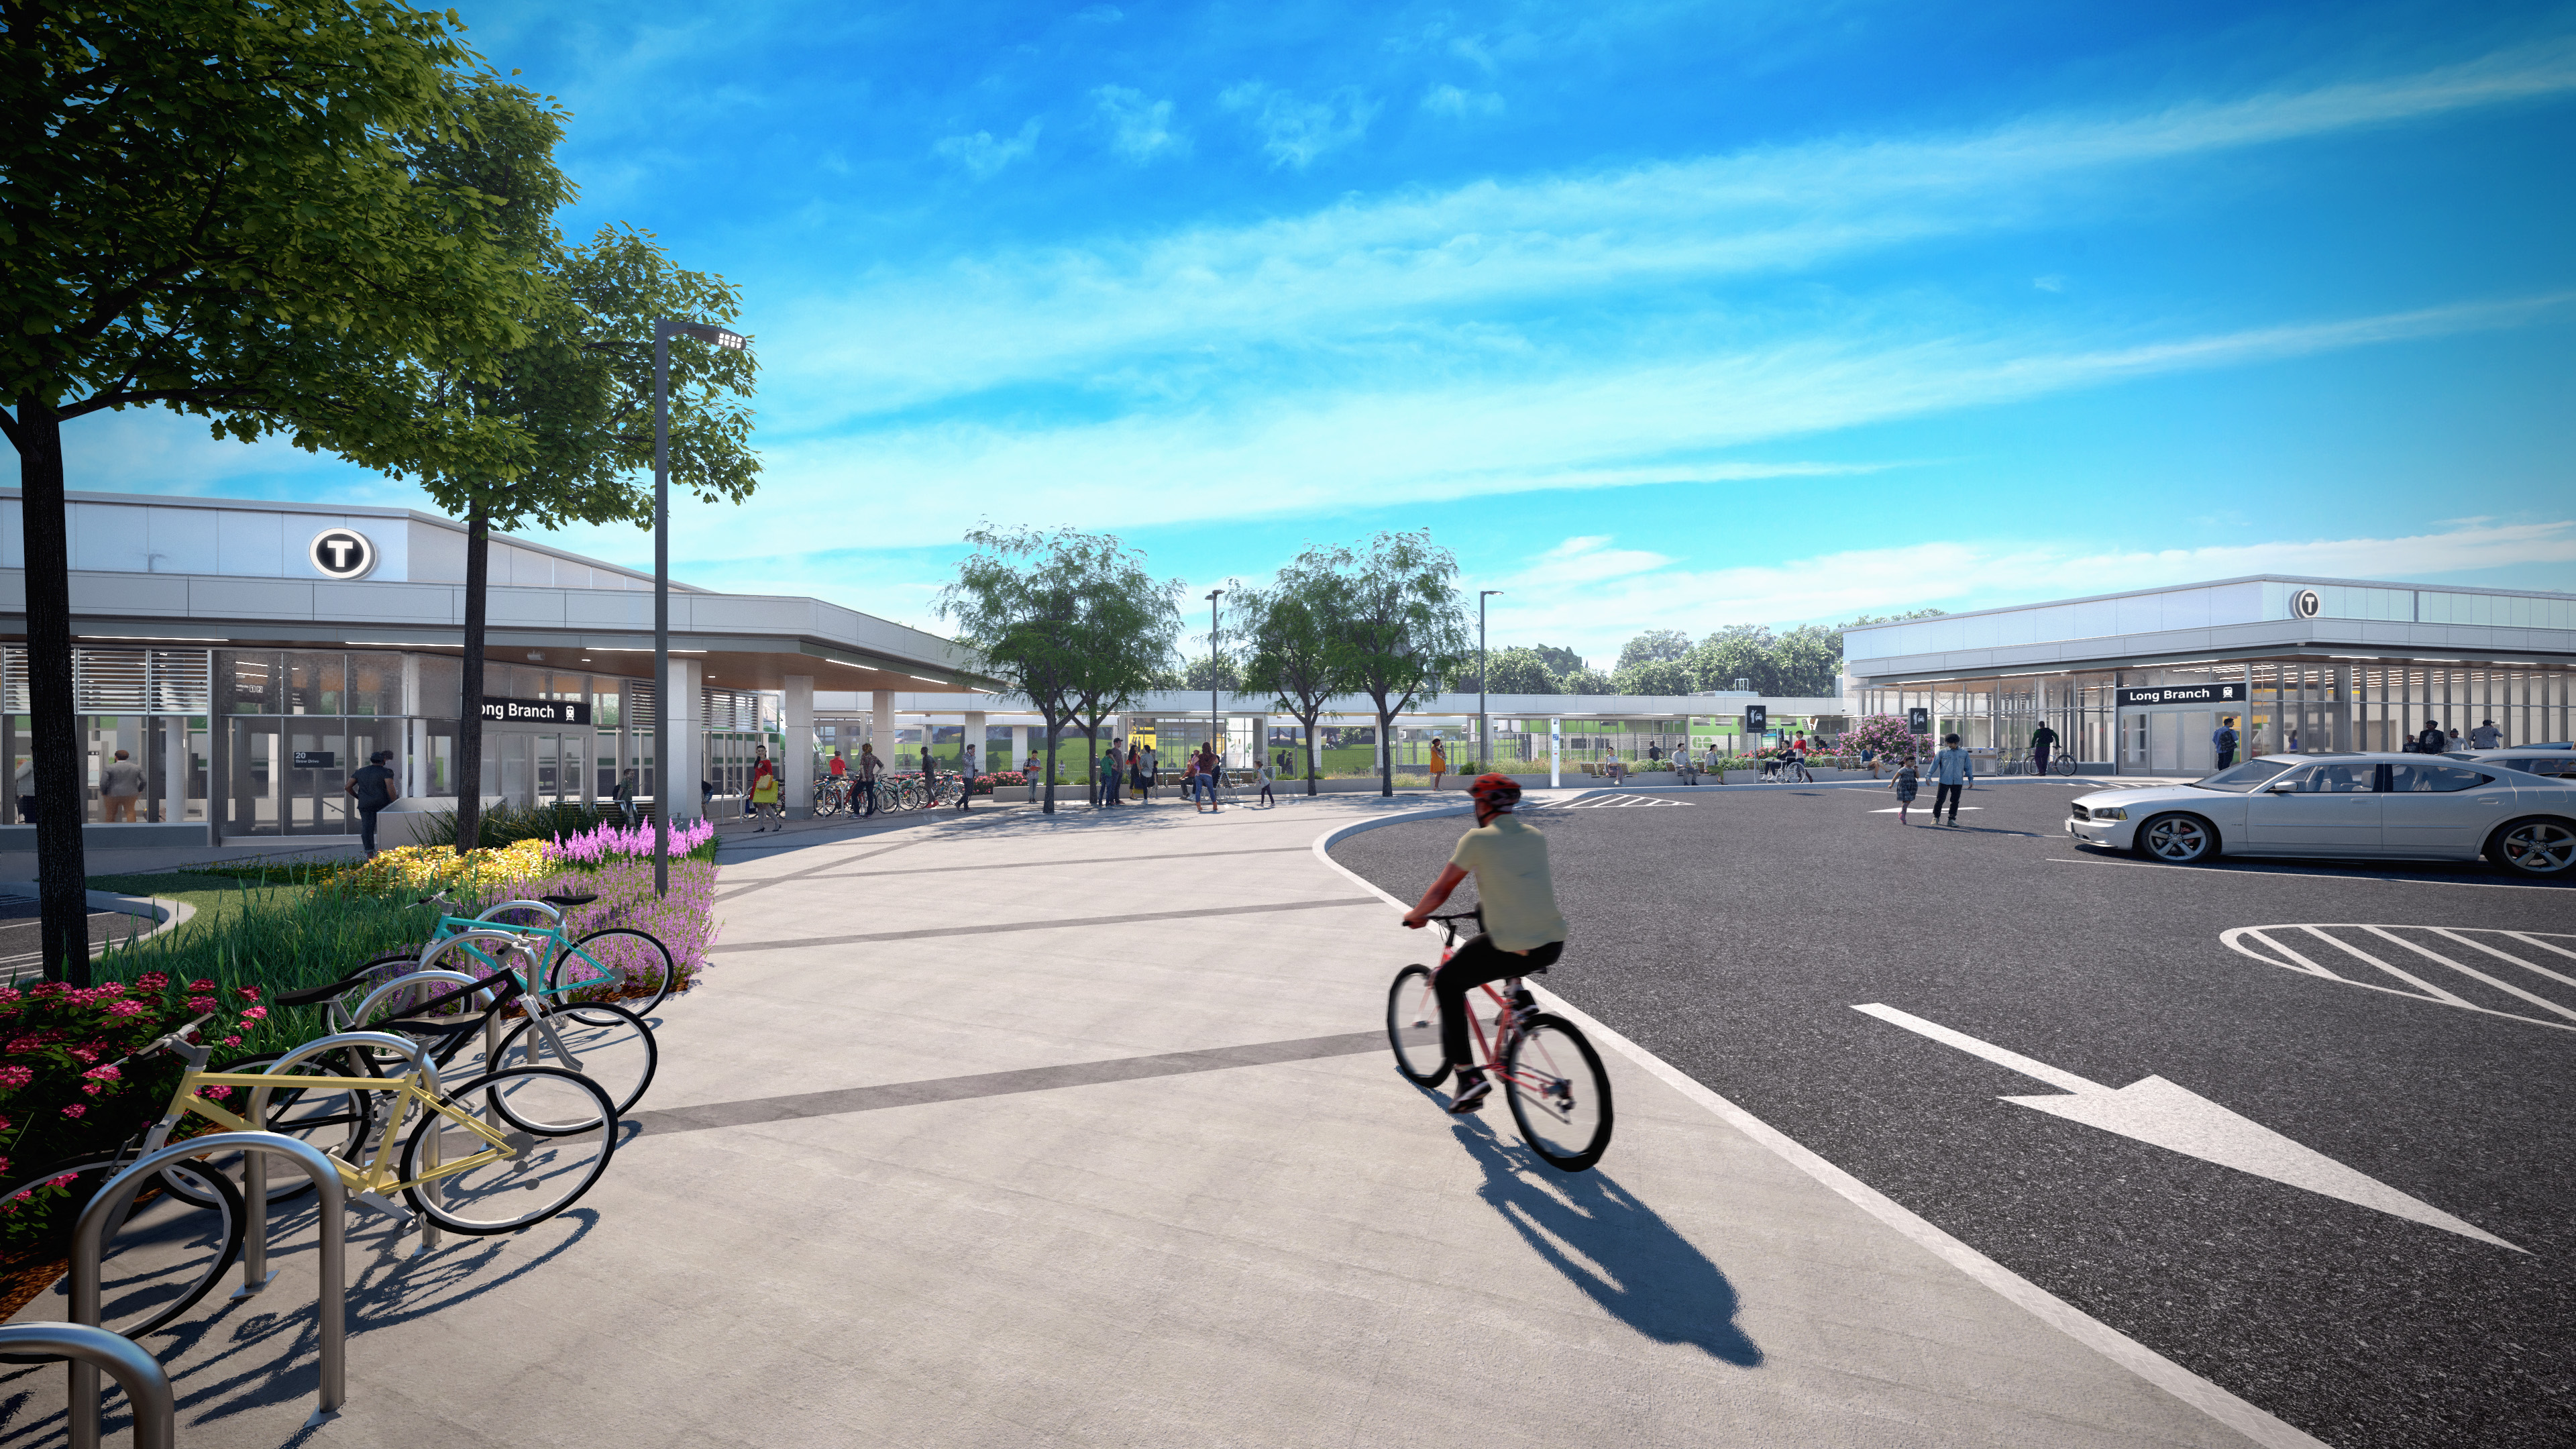 Full Plans Finally Revealed for Refreshed Long Branch GO Station